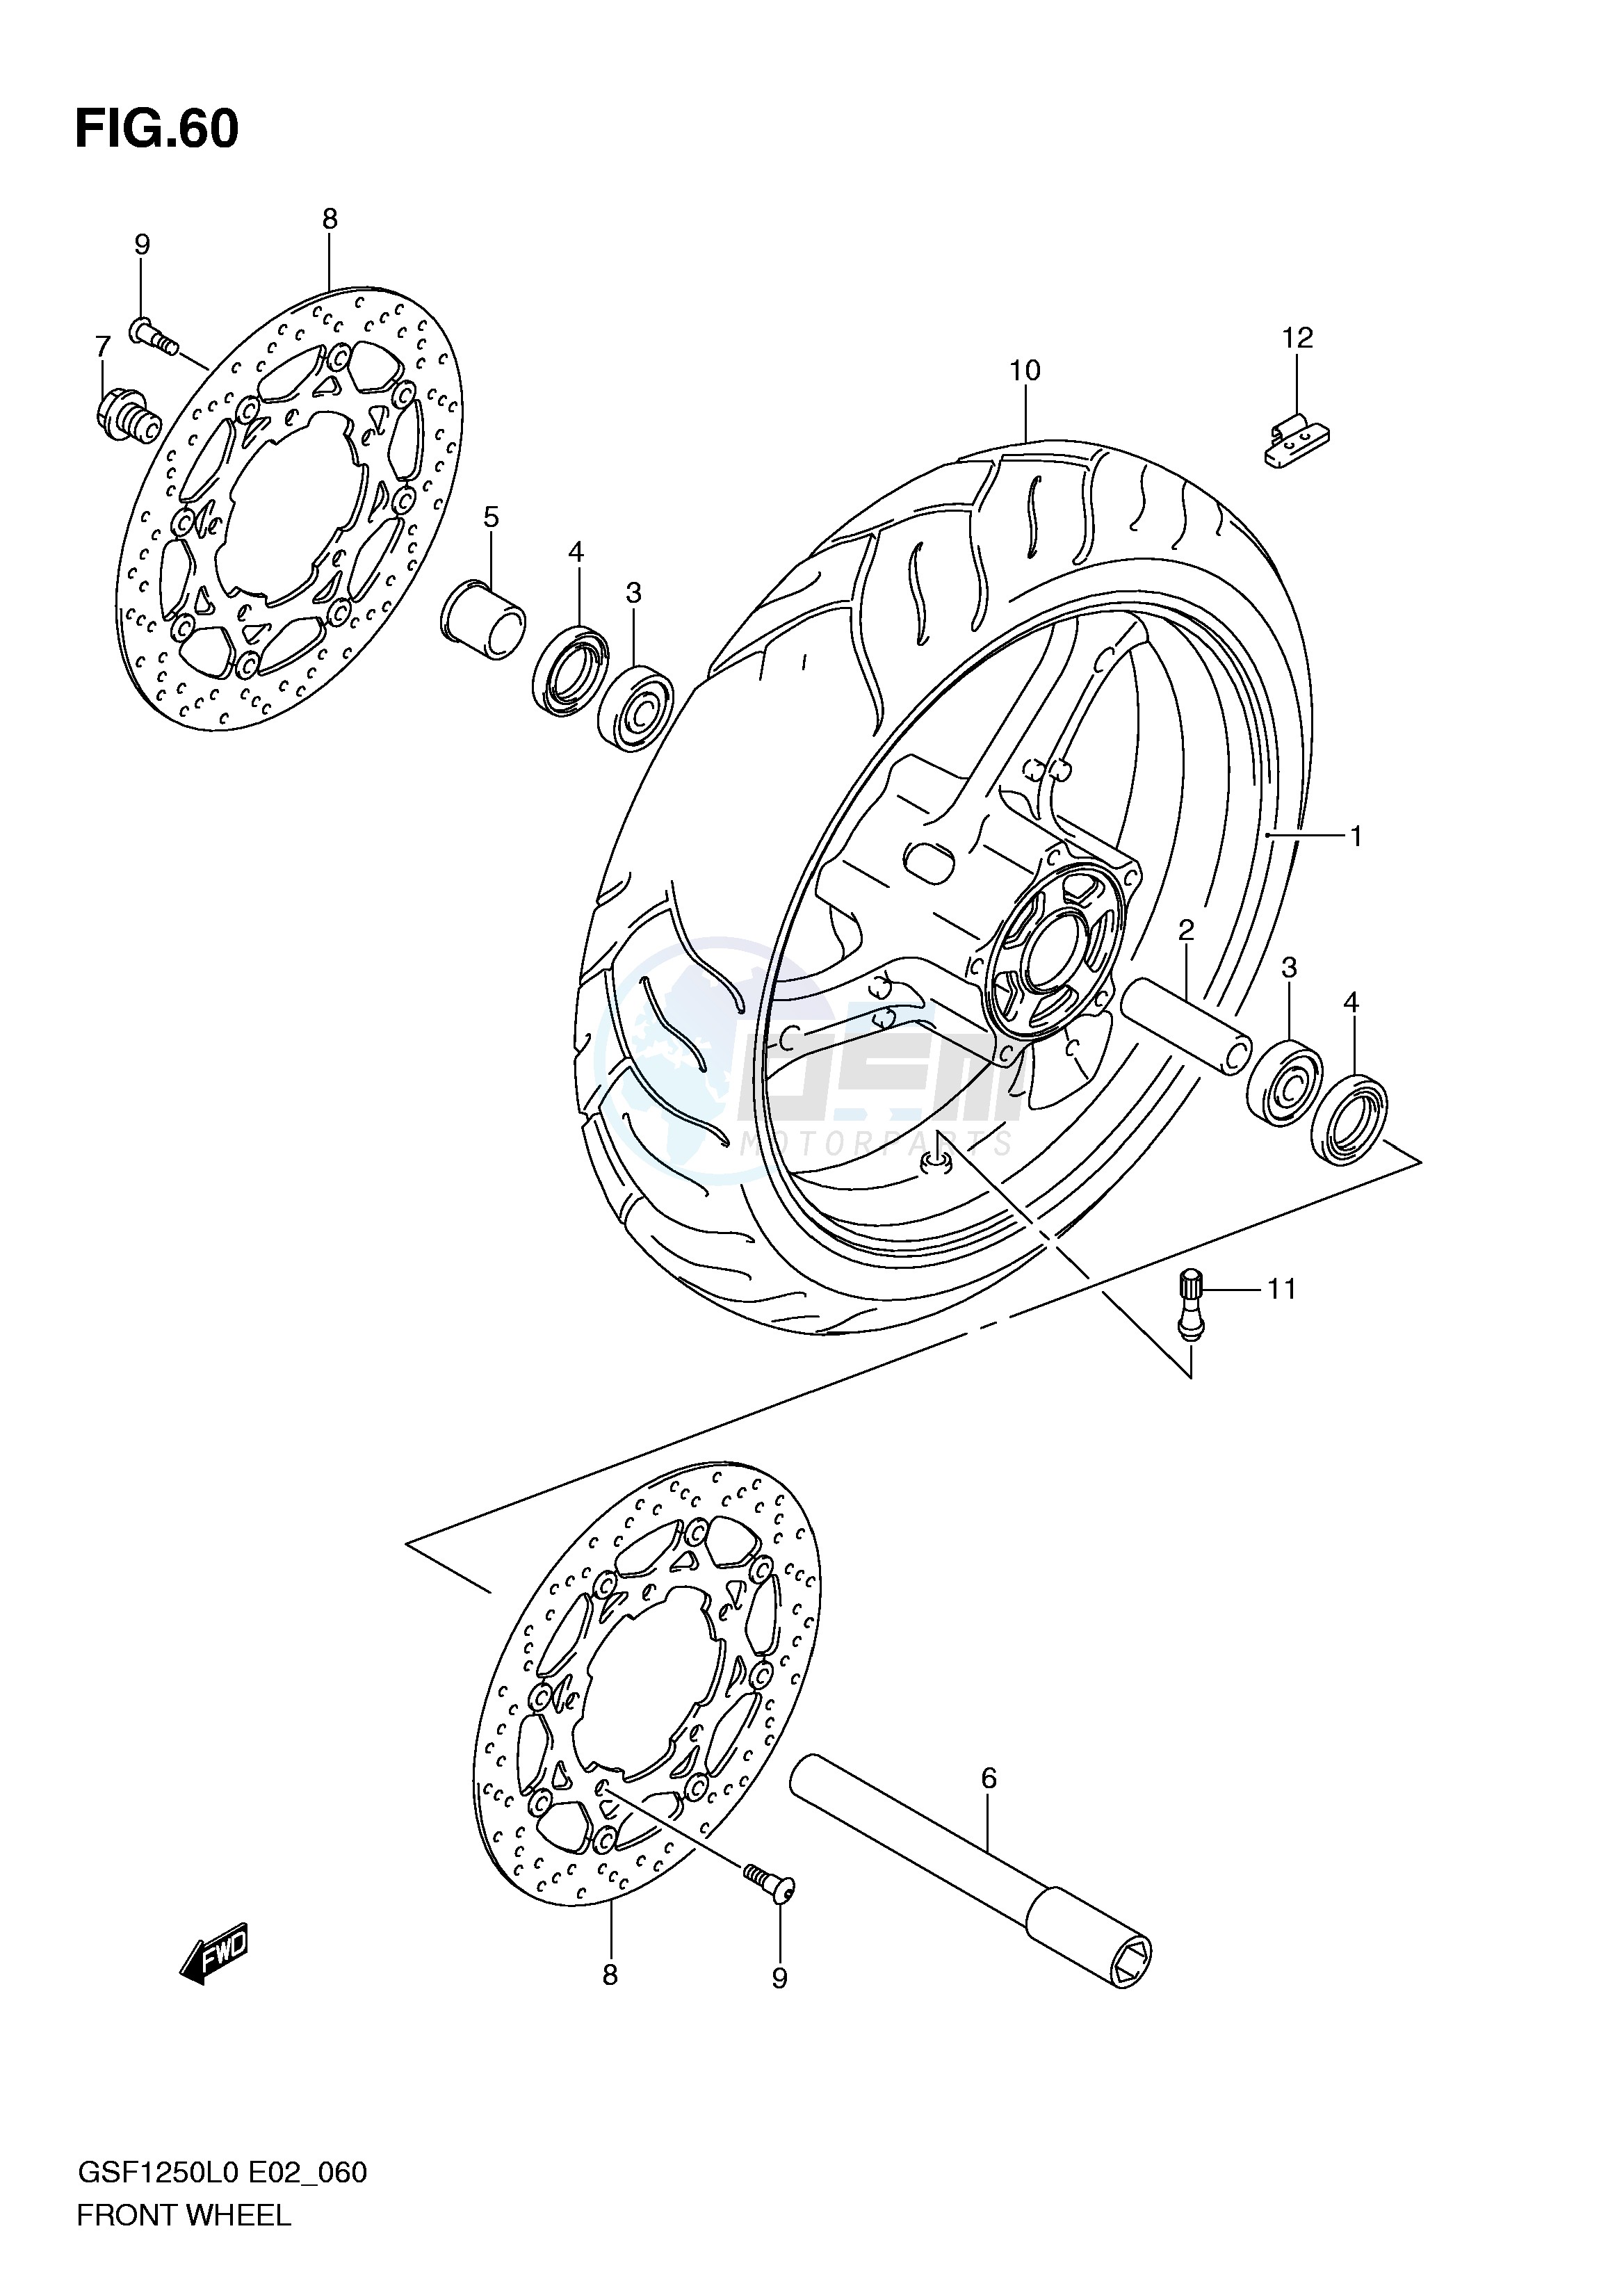 FRONT WHEEL (GSF1250L0) image